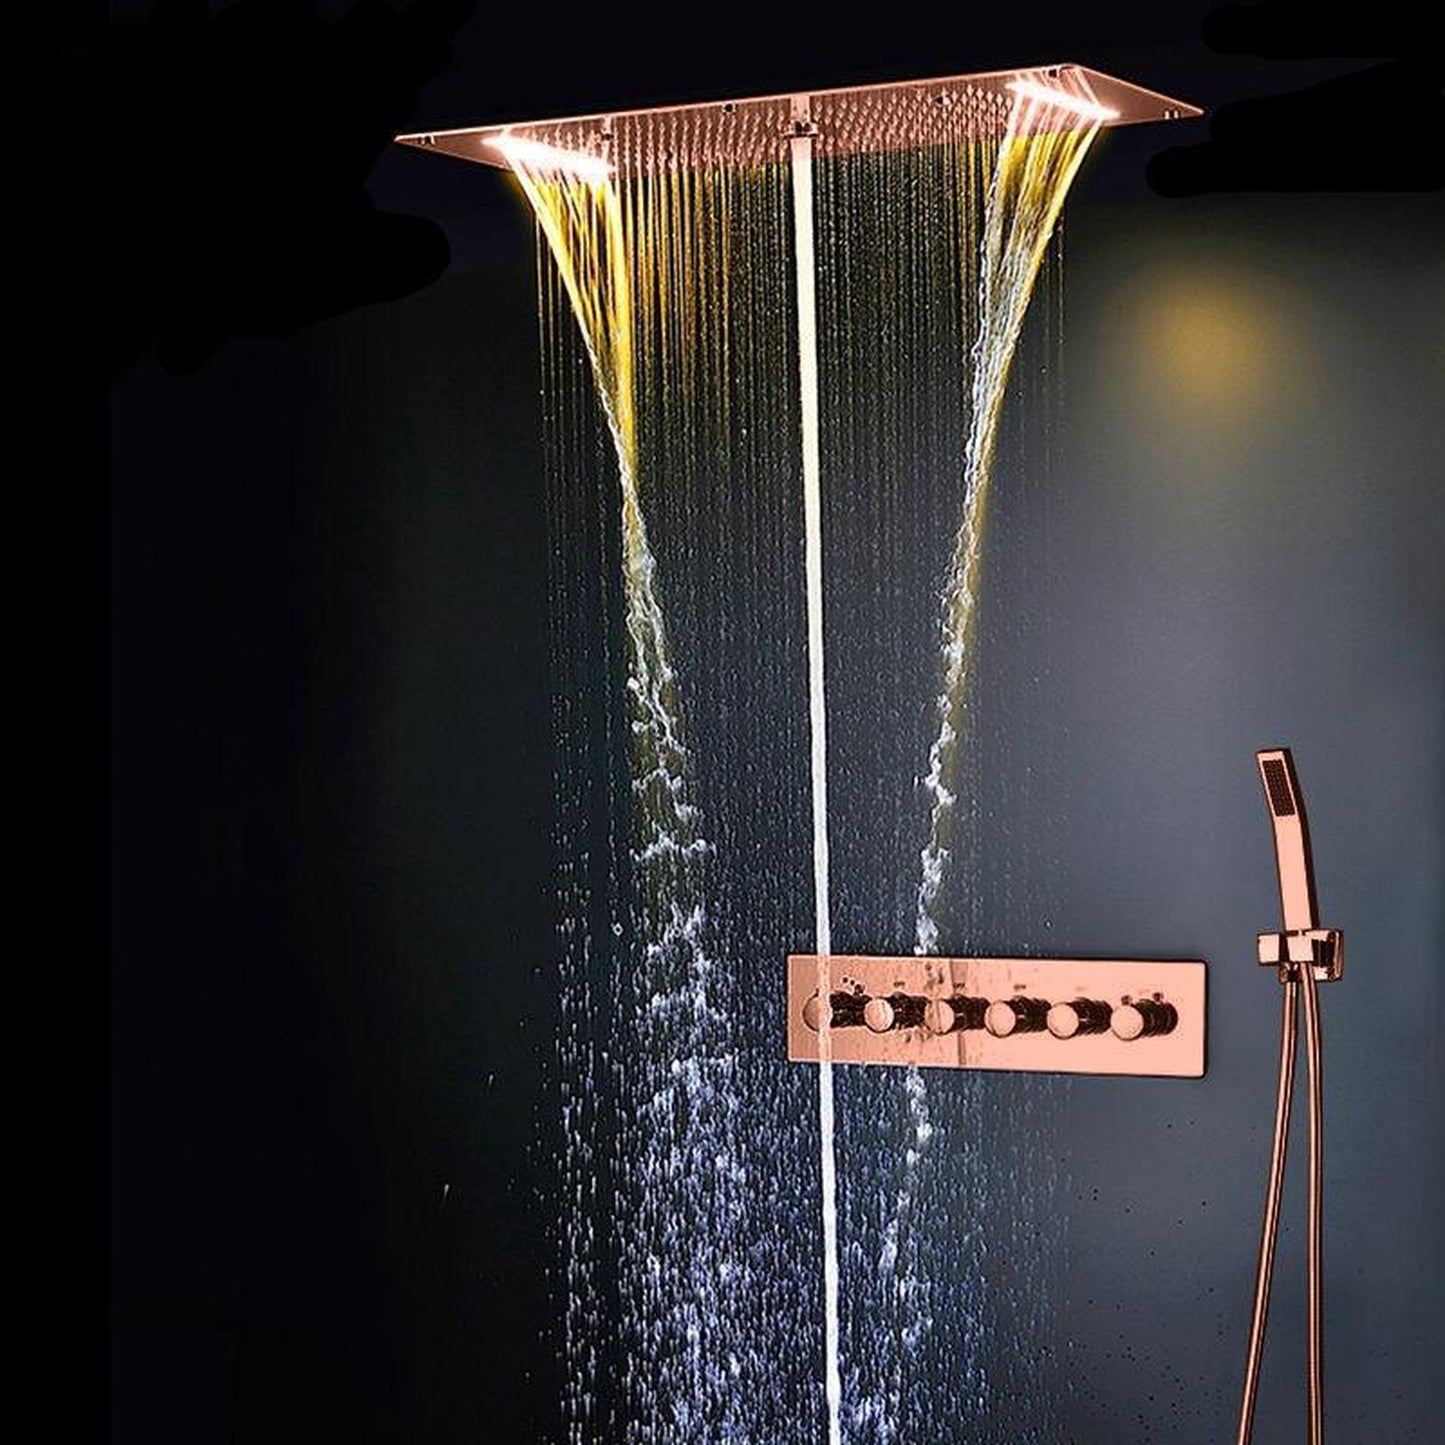 Fontana Oil Rubbed Bronze Extreme Luxury 3-Way Shower Head With Body Jet and Hand Shower